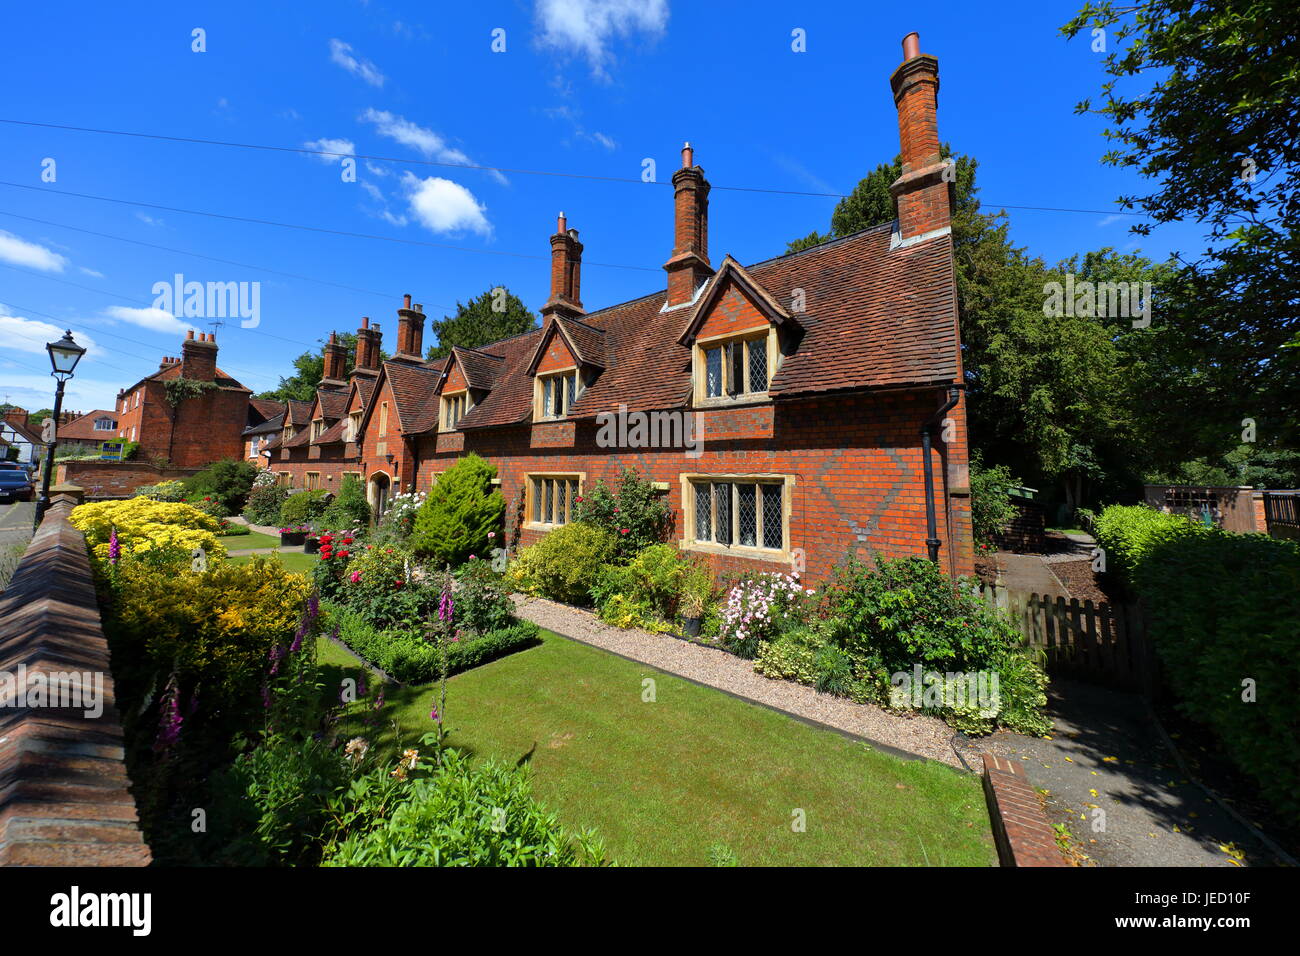 The row of Alms houses in the small village of Sonning on Thames, sat in the Pearson road in an idyllic village setting. Stock Photo